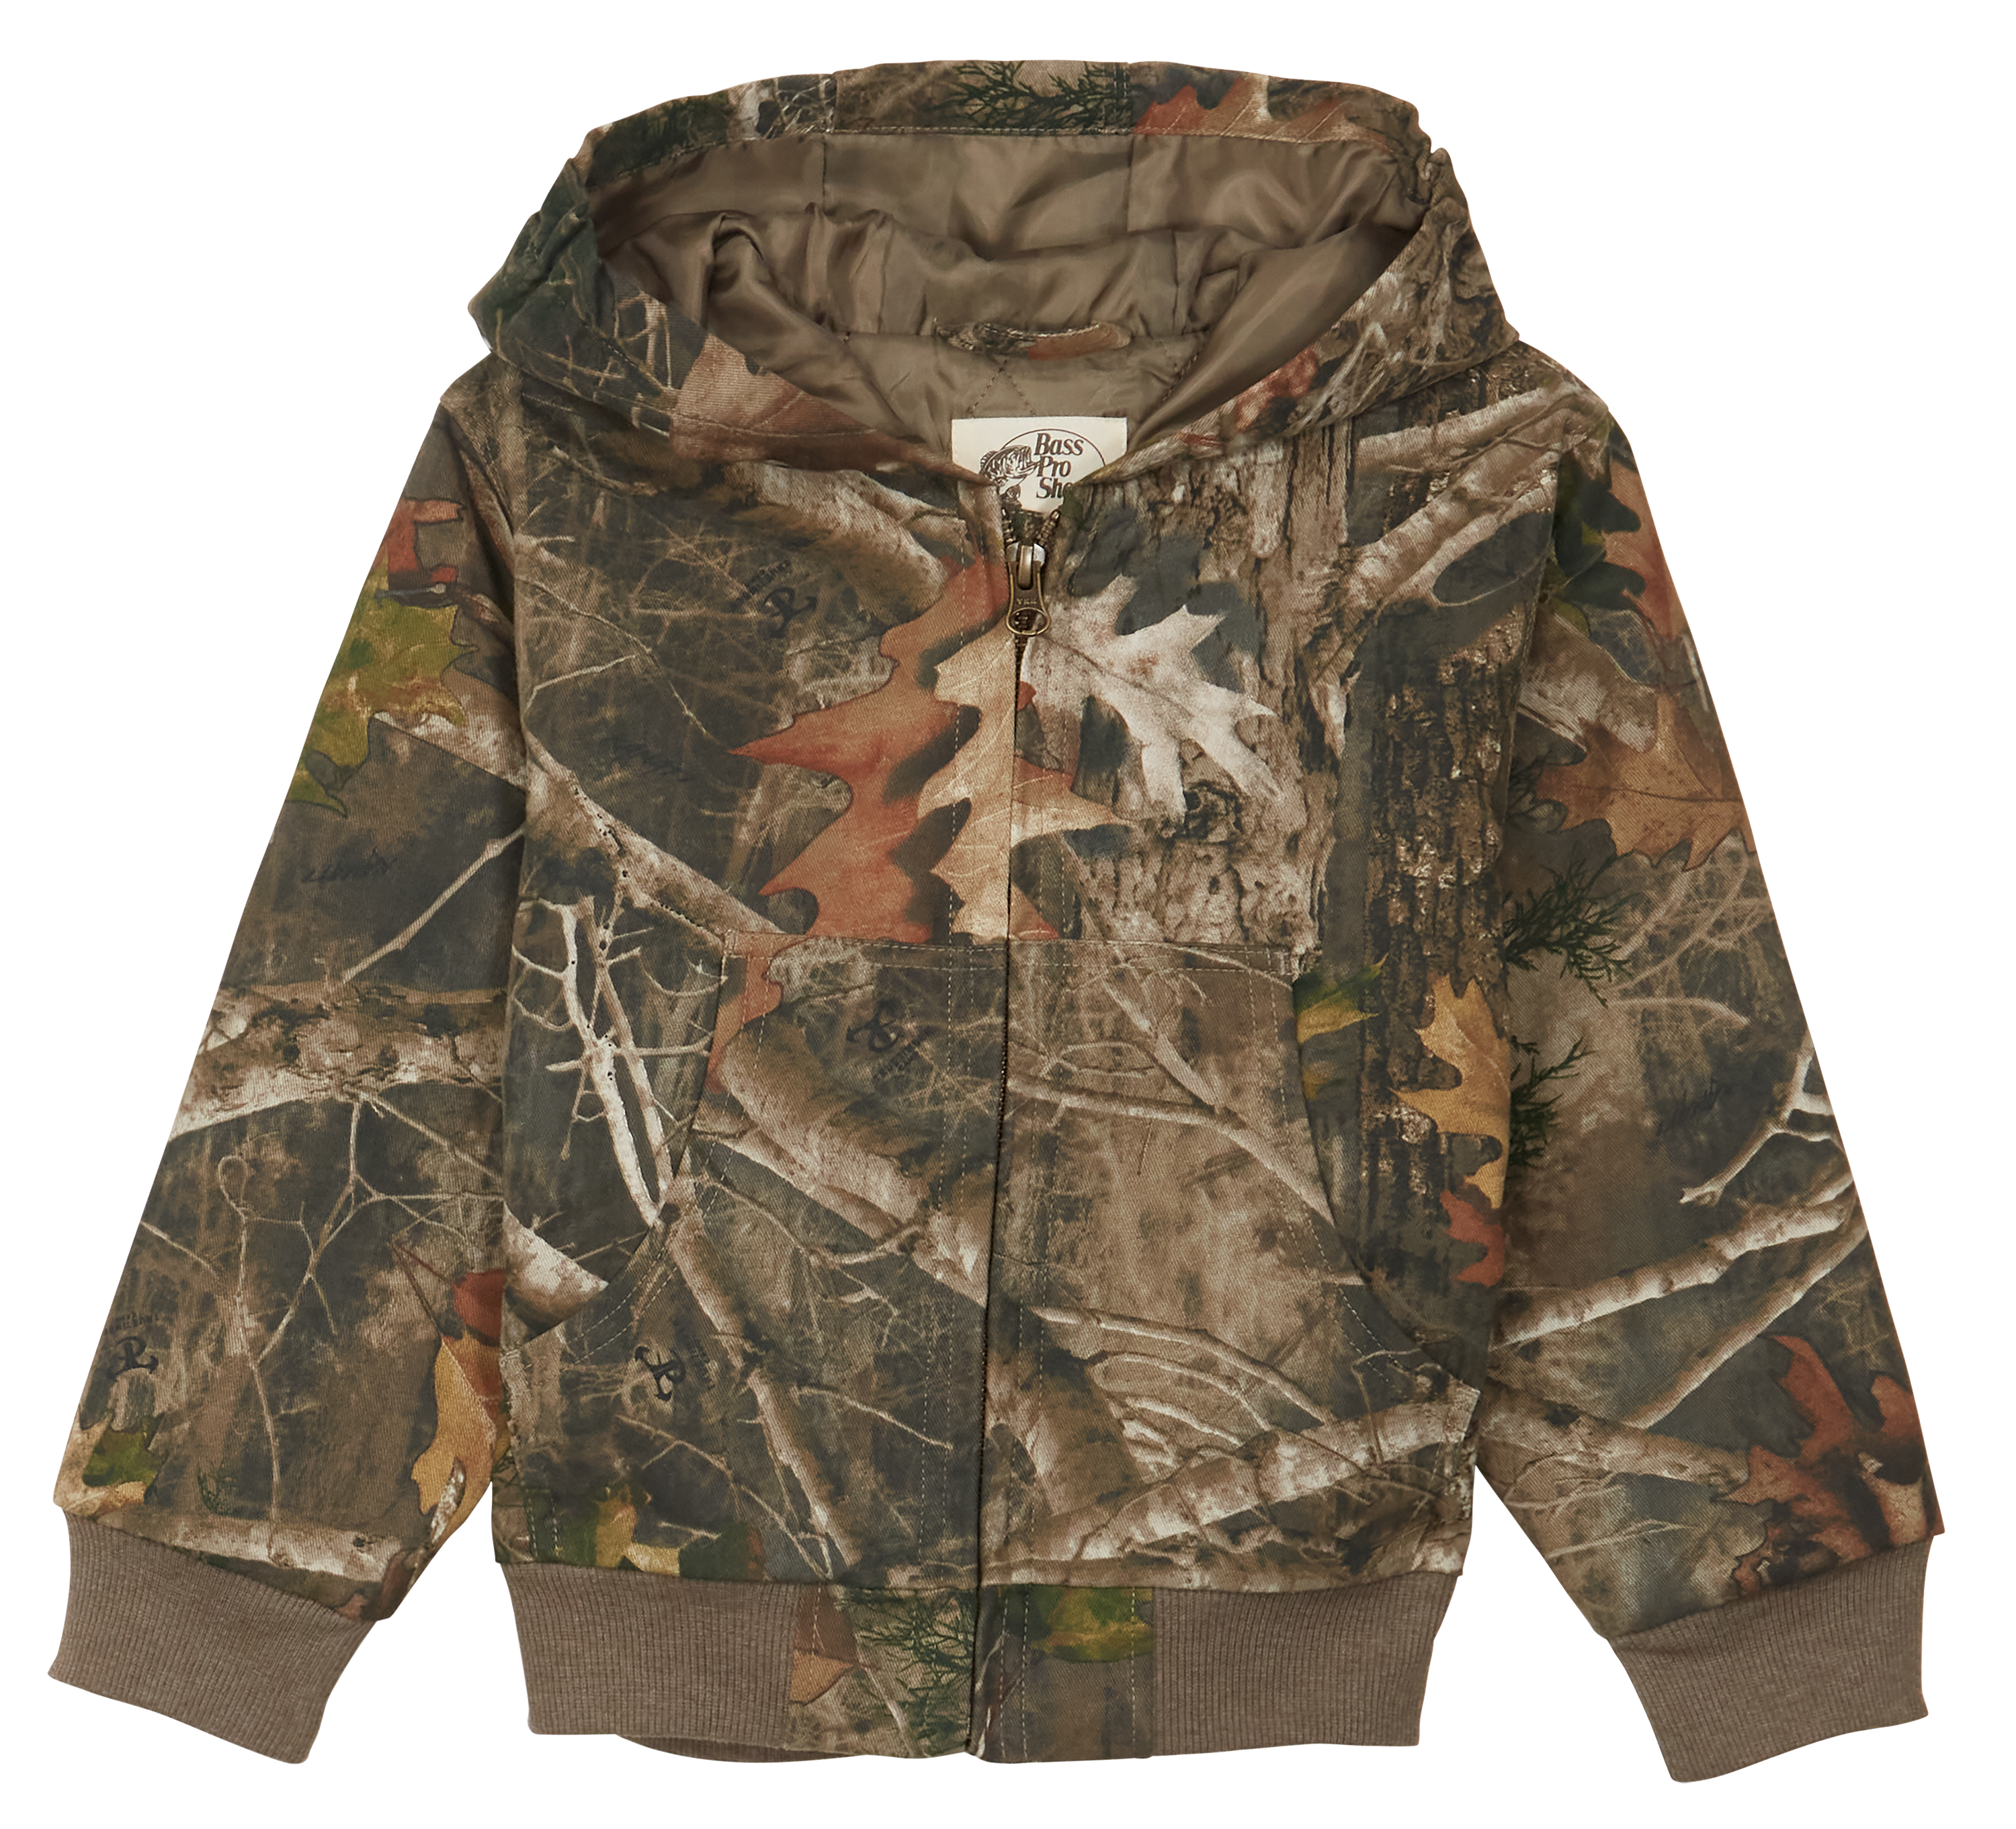 Bass Pro Shops Hooded Camo Jacket for Babies or Toddlers | Bass Pro Shops